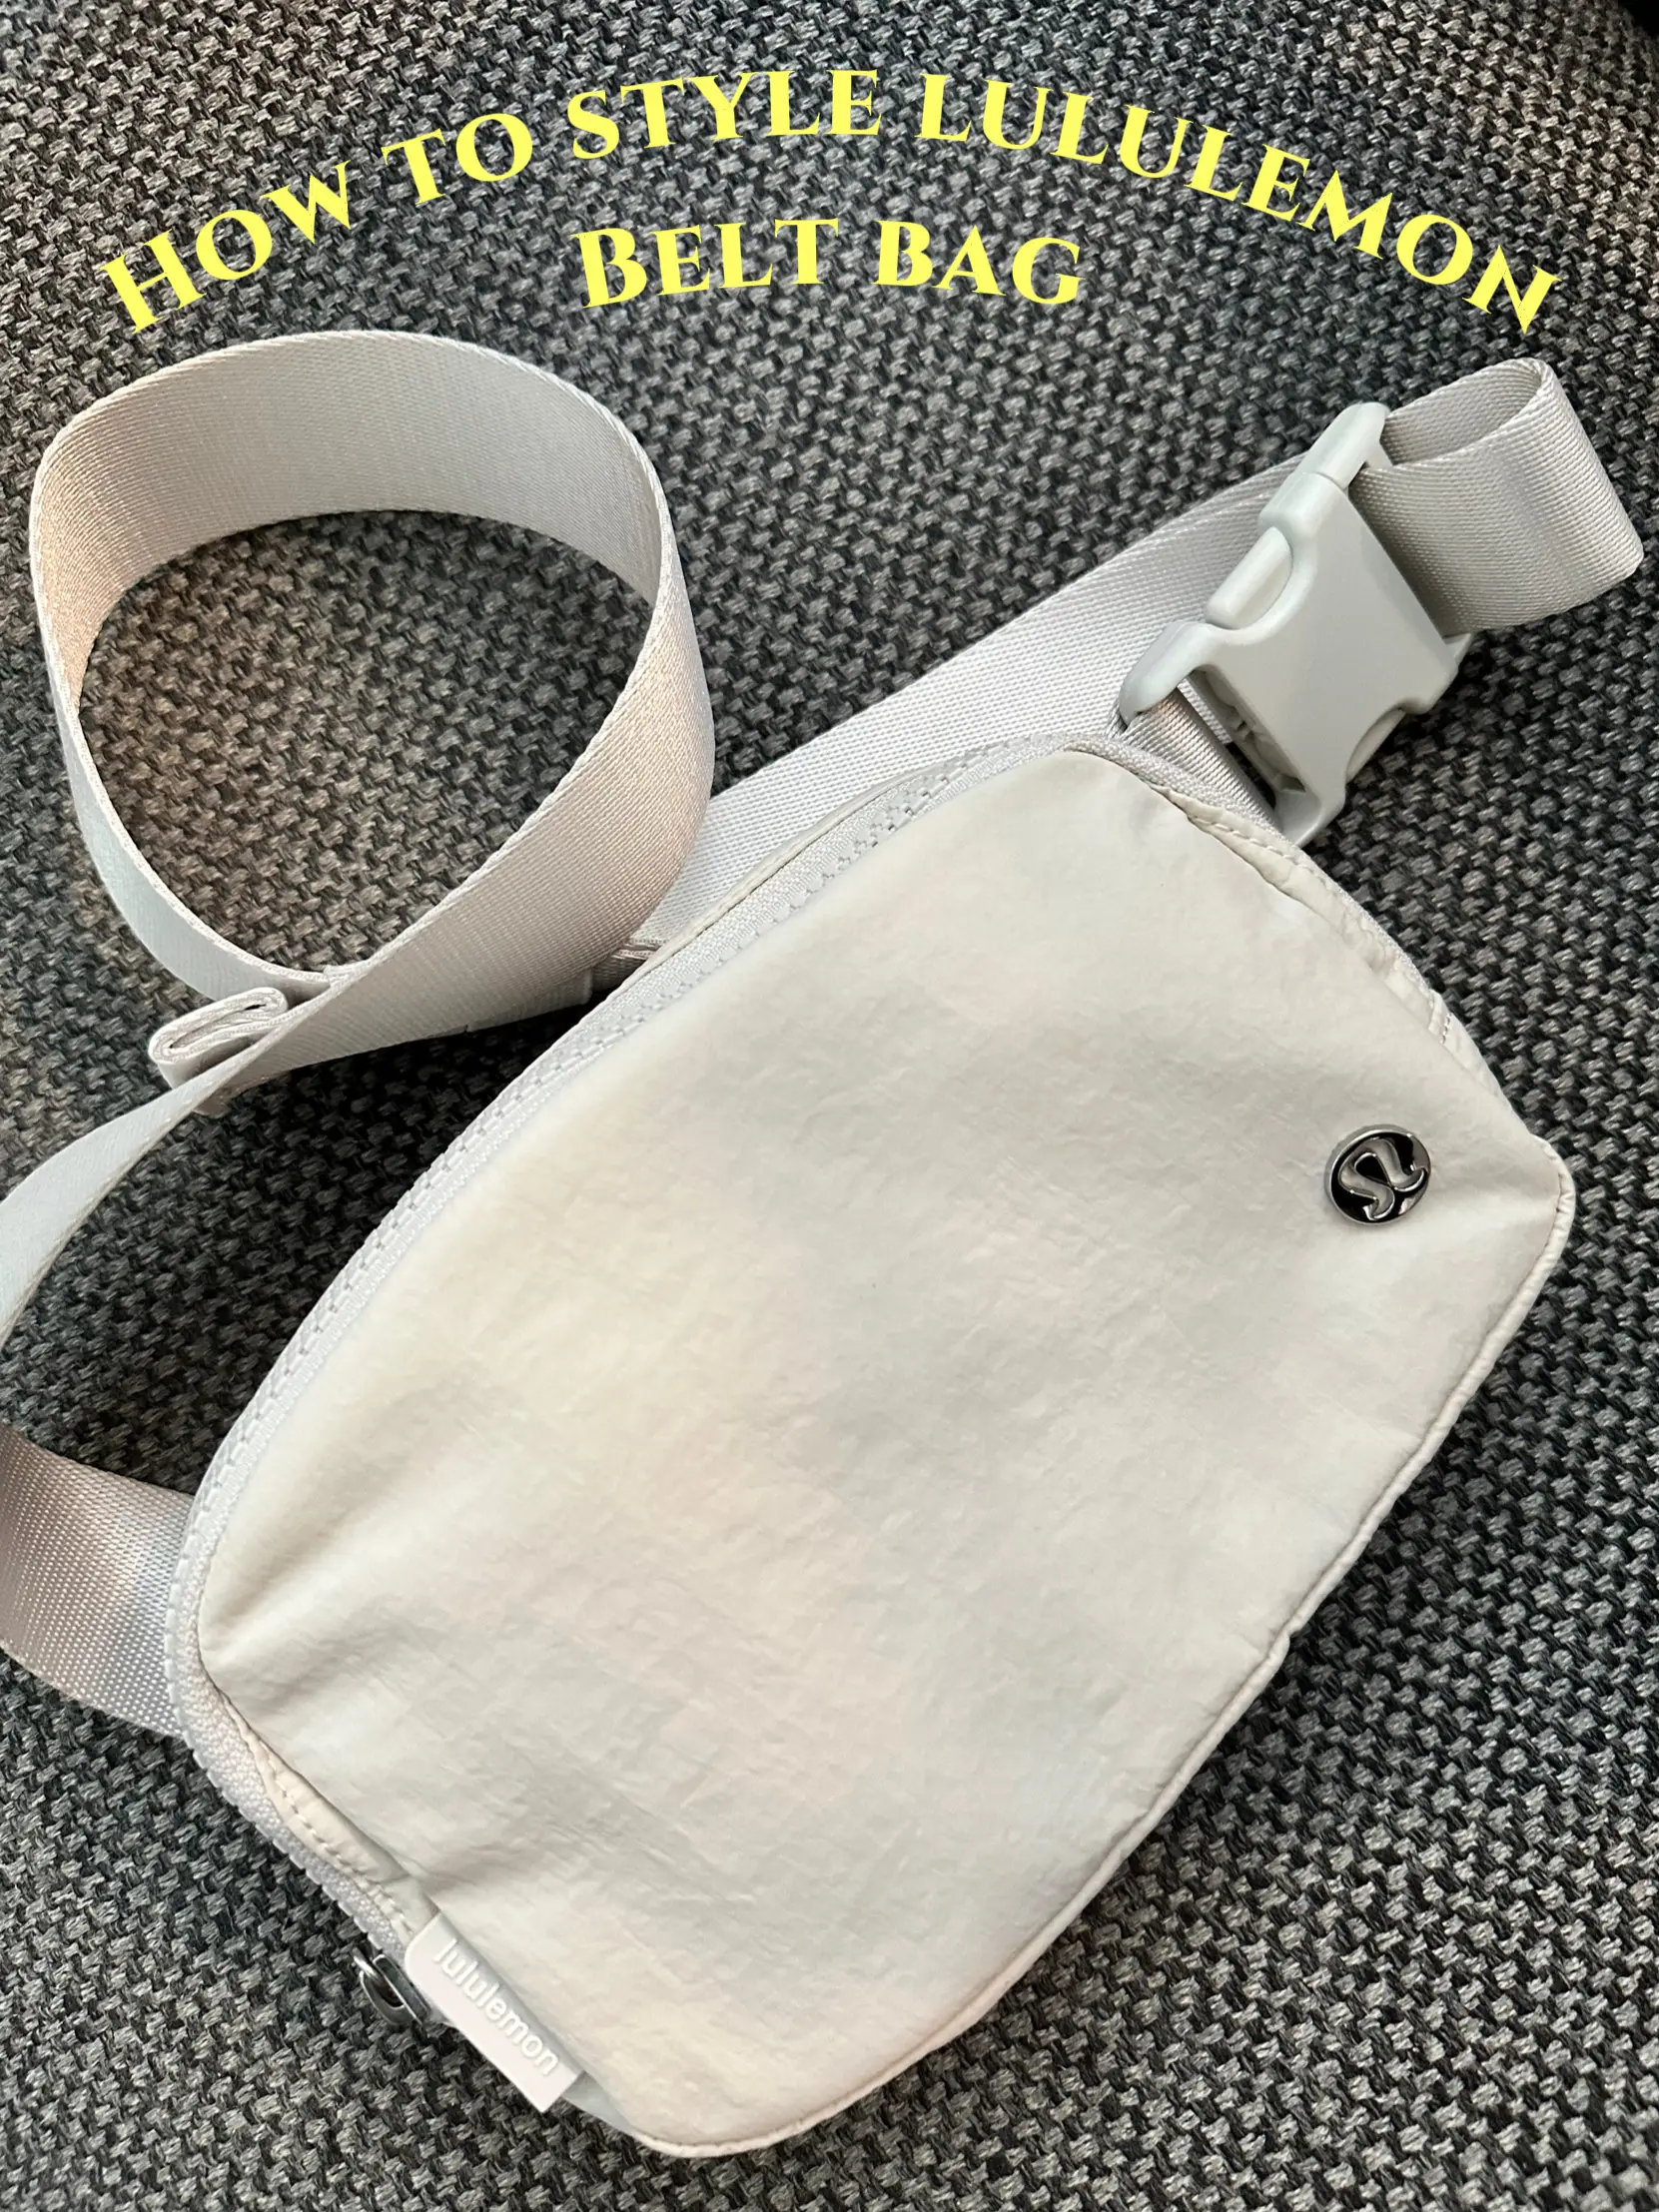 How to style lululemon belt bag! 🫶🏼, Gallery posted by Chandu